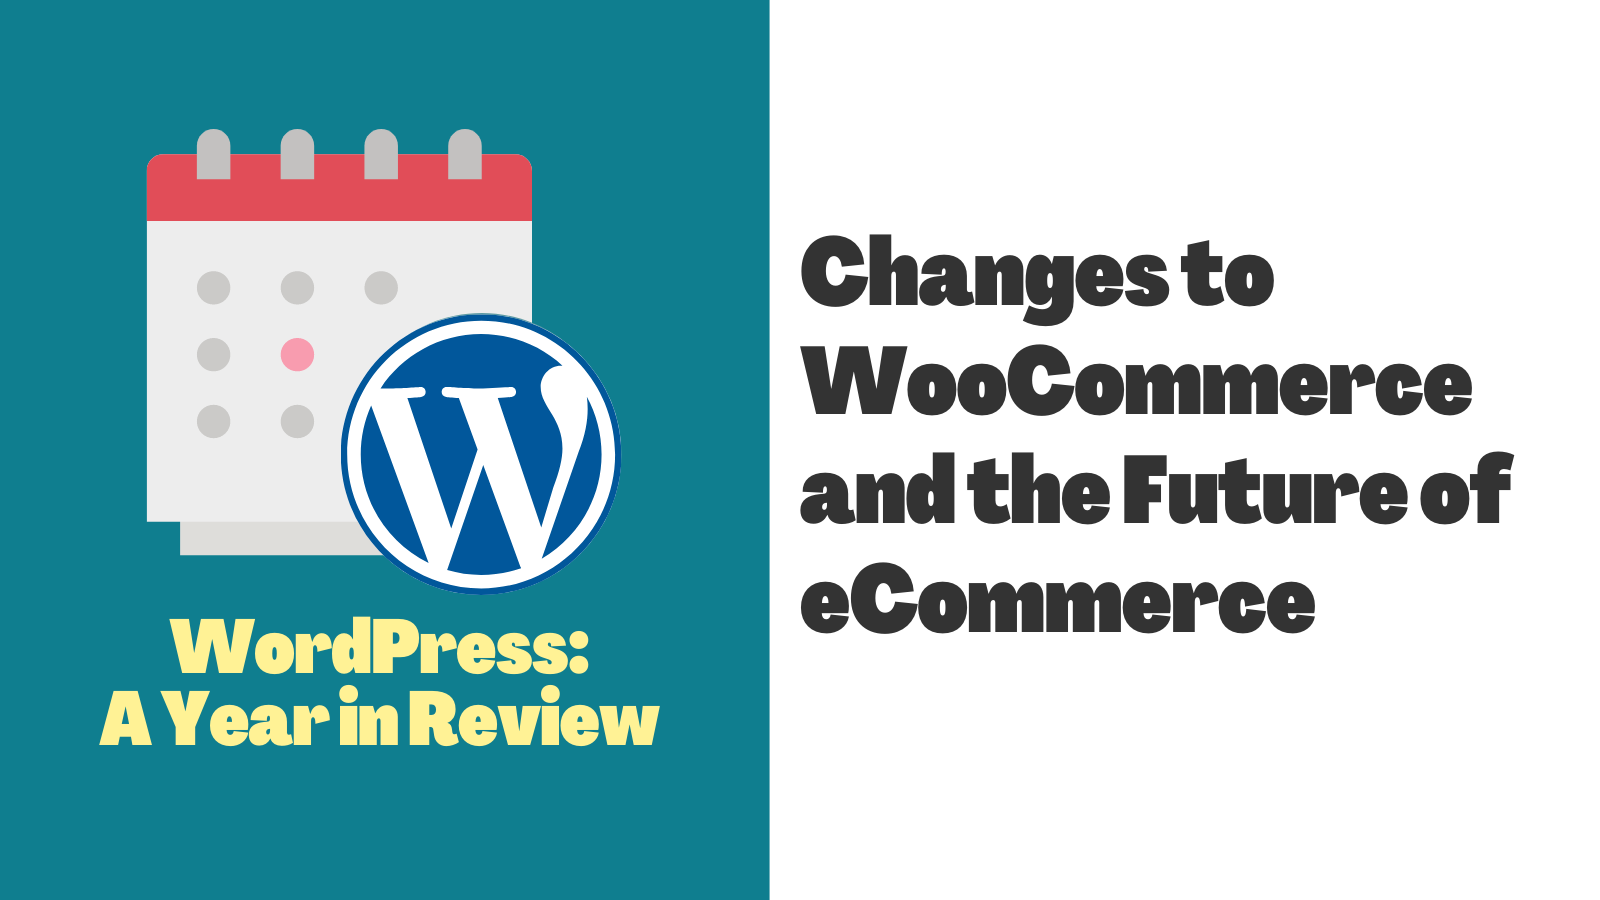 Changes to WooCommerce and the Future of eCommerce